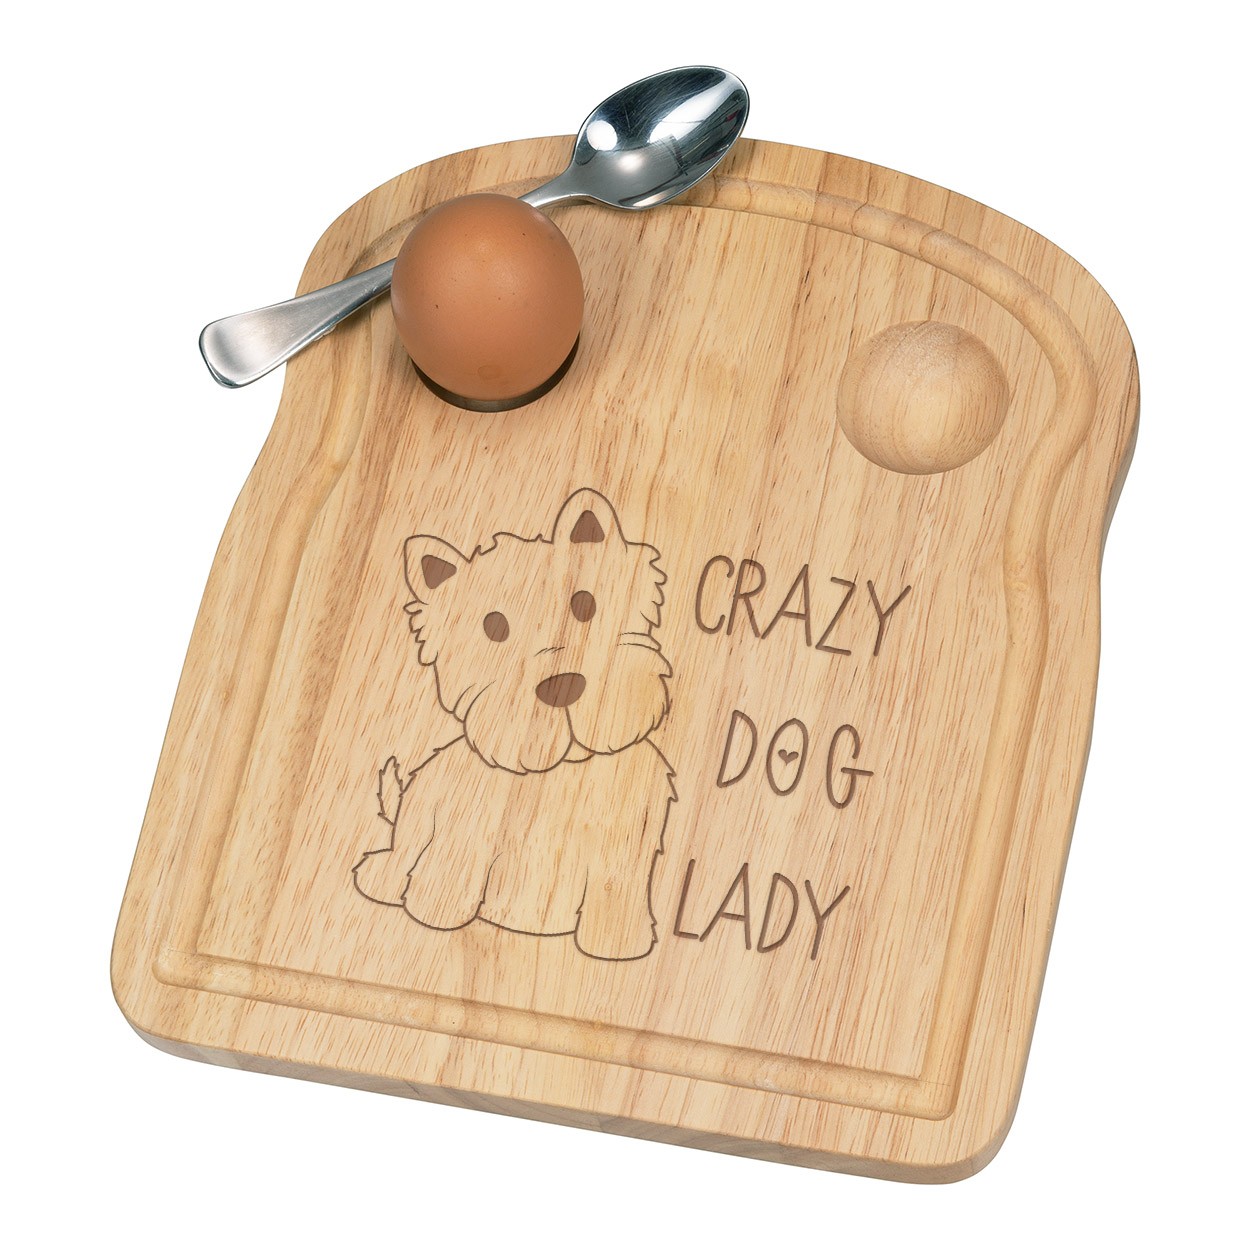 Crazy Dog Lady Breakfast Dippy Egg Cup Board Wooden